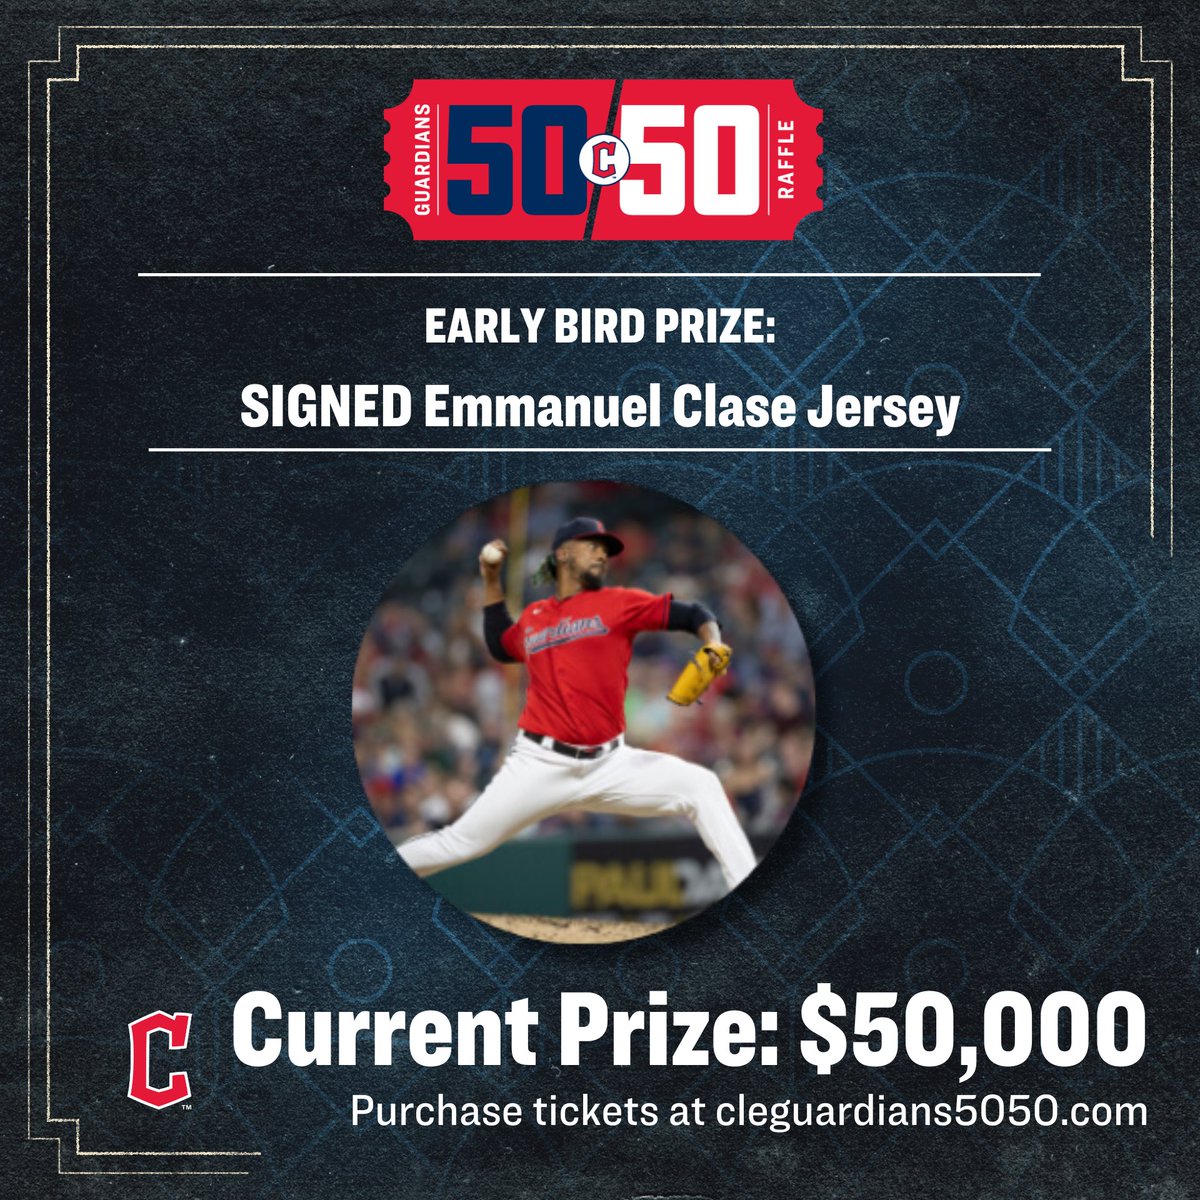 Did you know that if you purchase your 50/50 tickets by April 8th at 11:59 p.m. ET that you have the opportunity to win a SIGNED Emmanuel Clase jersey? 🤔😁 Purchase your tickets at cleguardians5050.com 🎟️